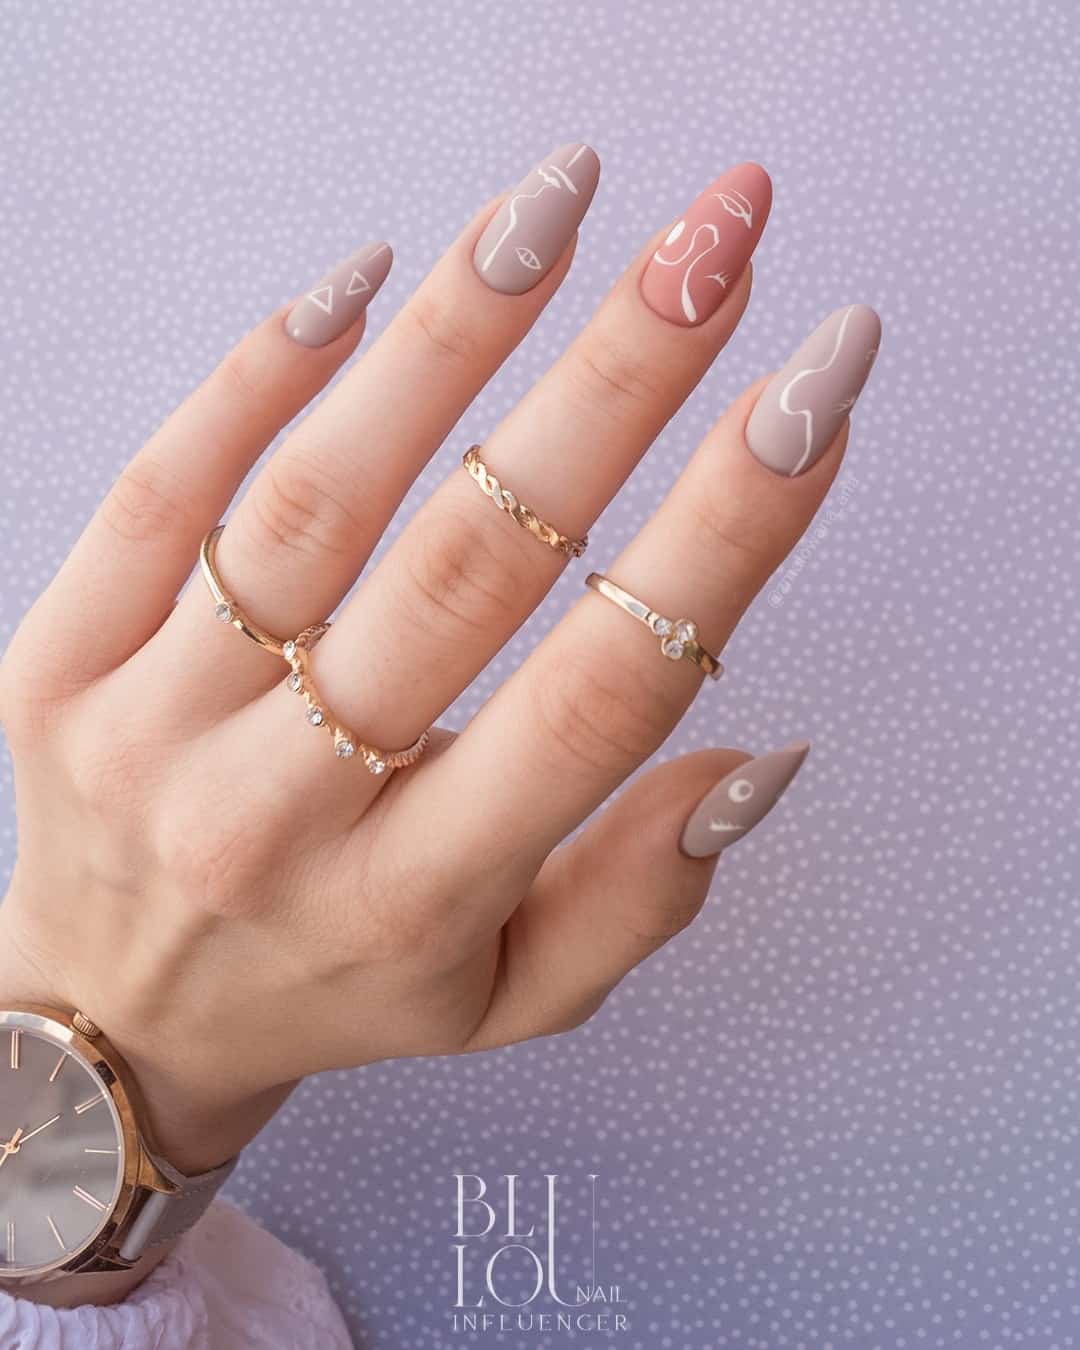 Matte mauve manicure with white thinly lined shapes. The Middle finger is a pinky mauve while the other fingers are a purple mauve.